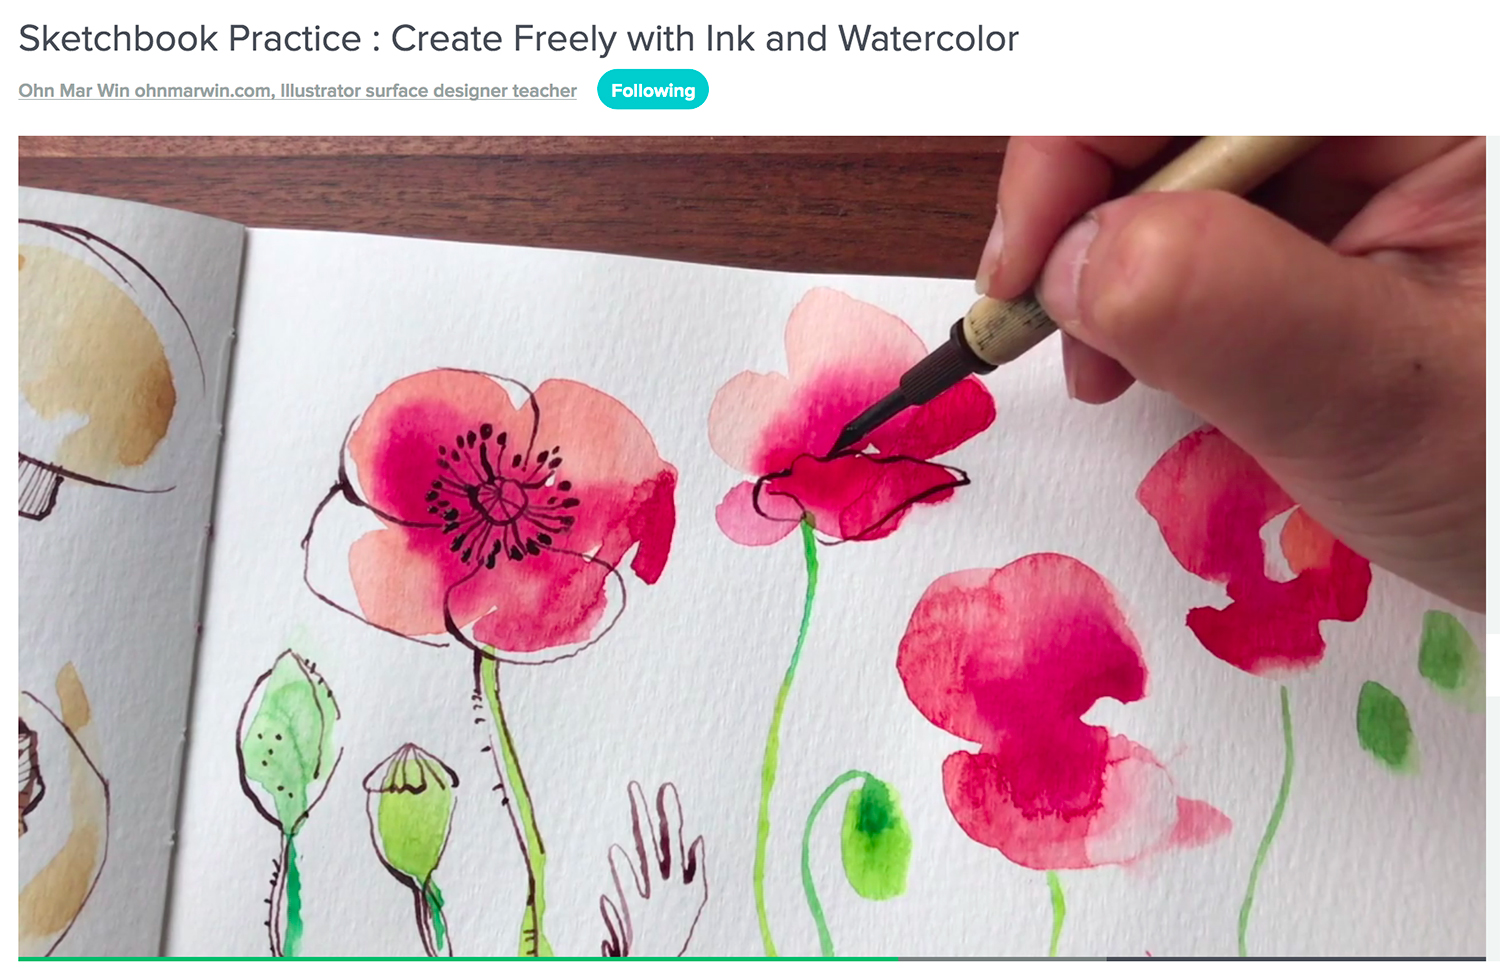 Pen & Ink with Watercolor Creations